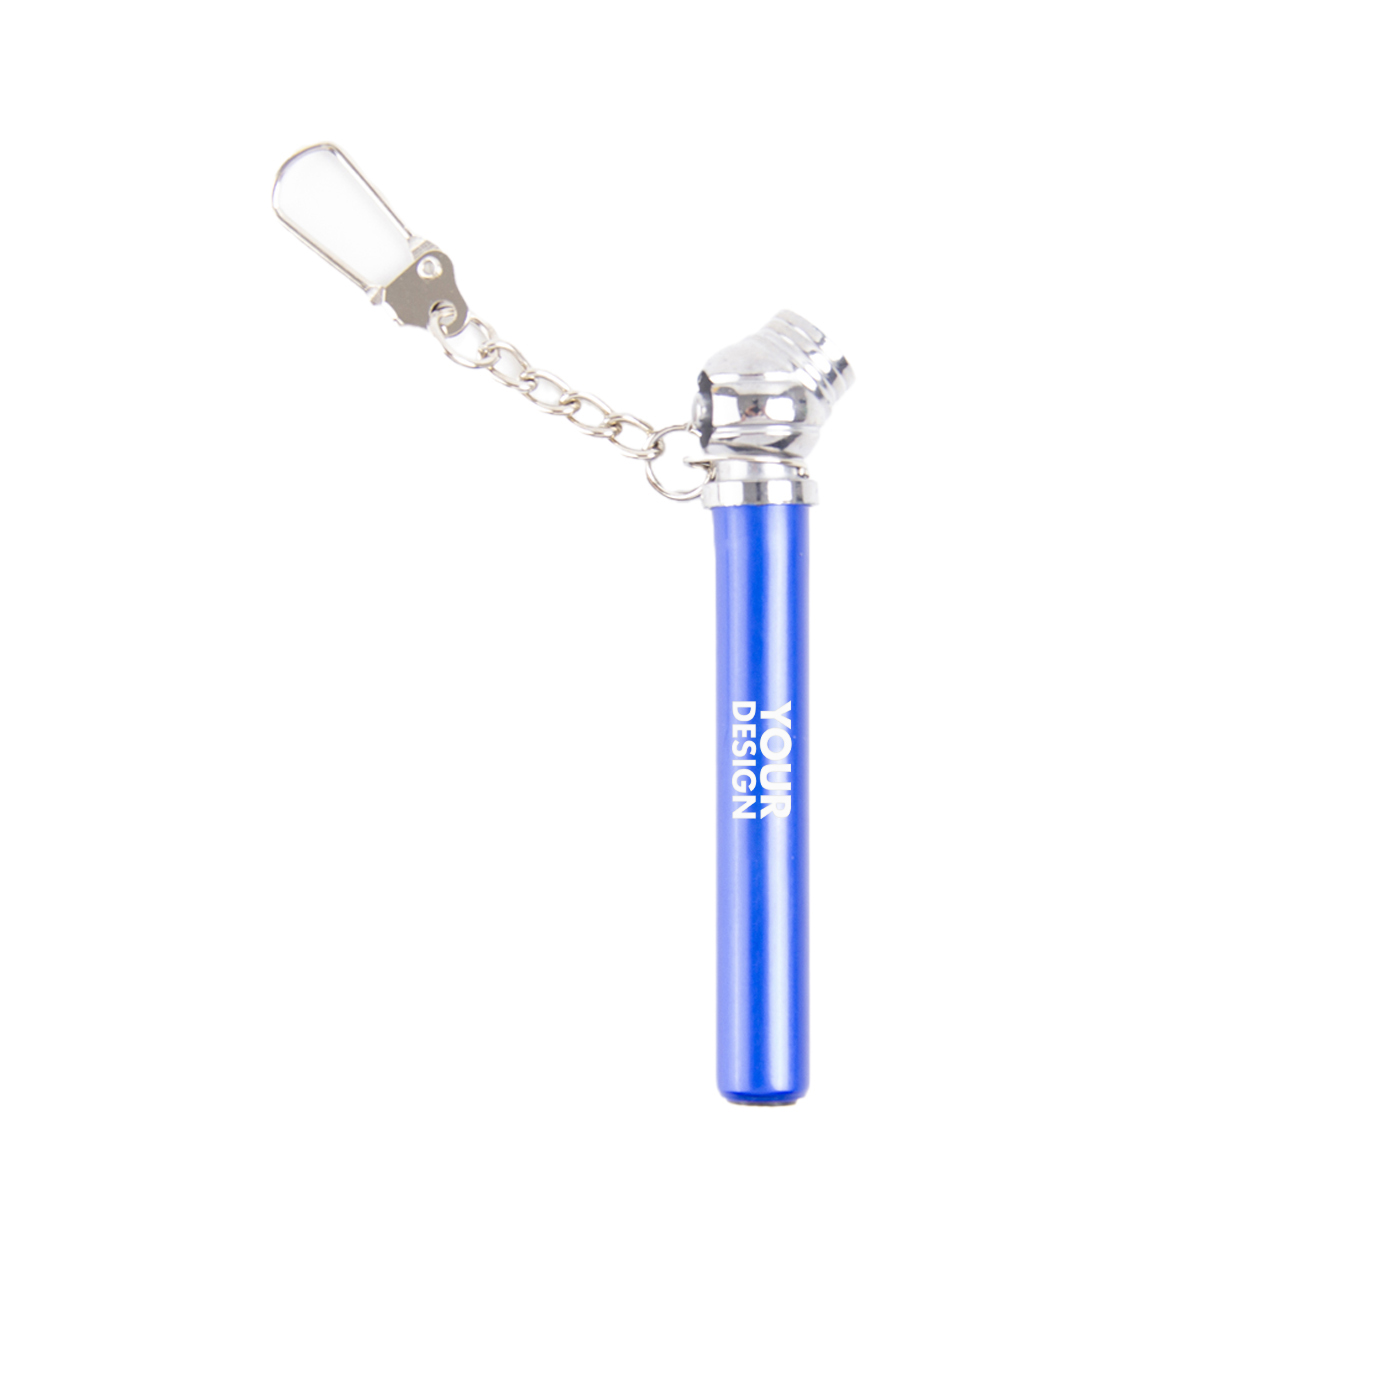 Promotional Tire Pressure Gauge With Keychain1